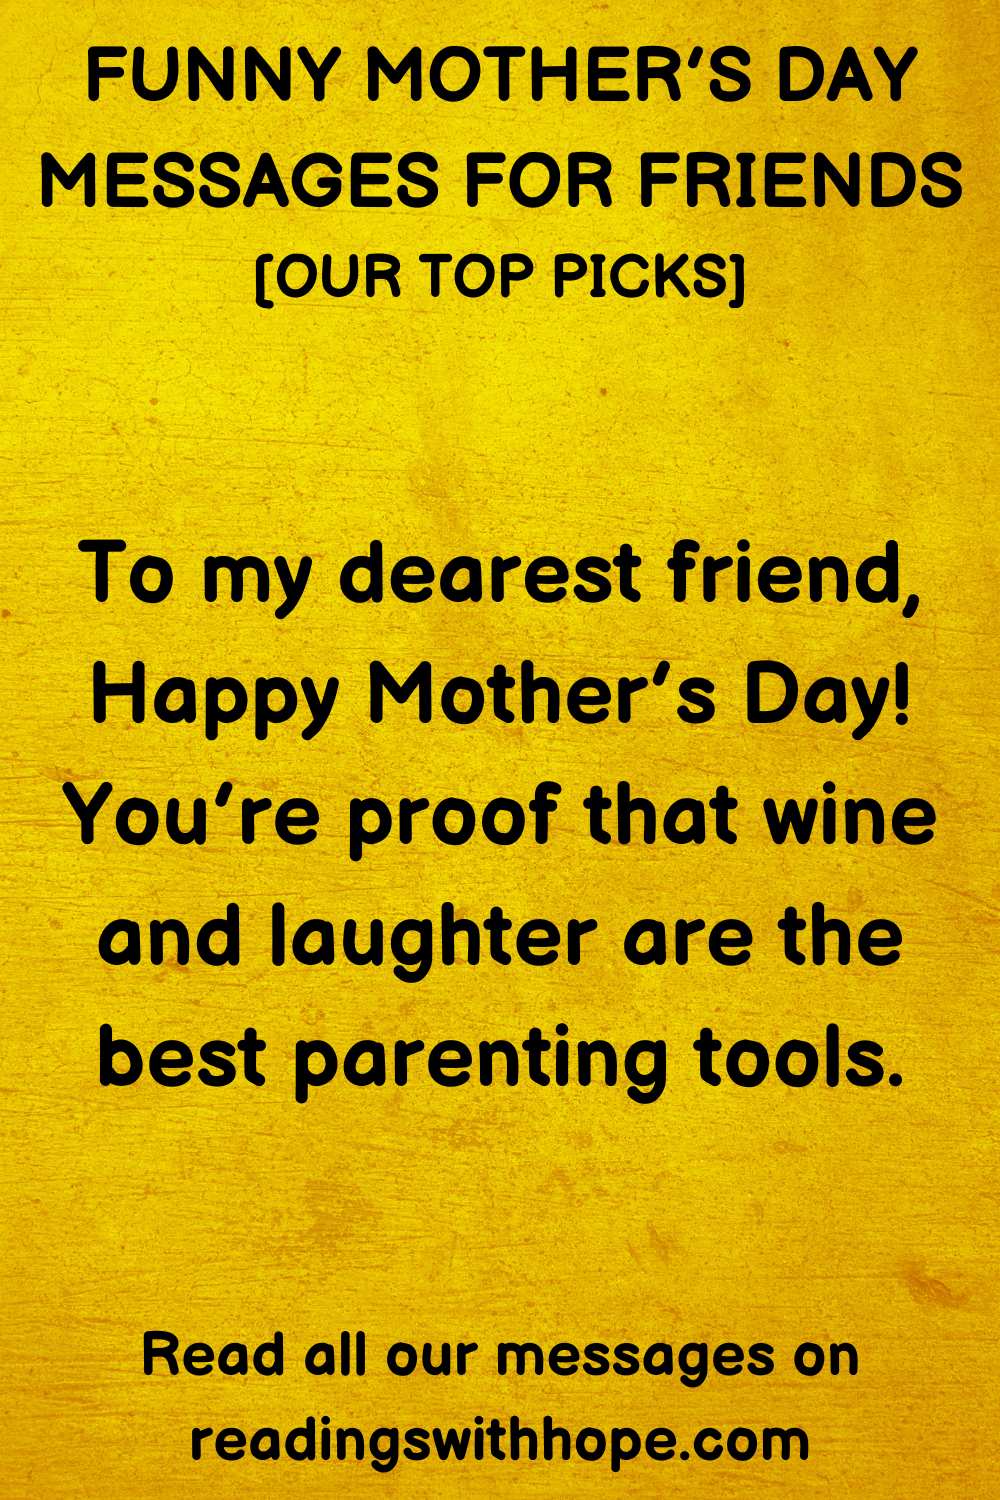 Funny Mother’s Day Messages For Friends
